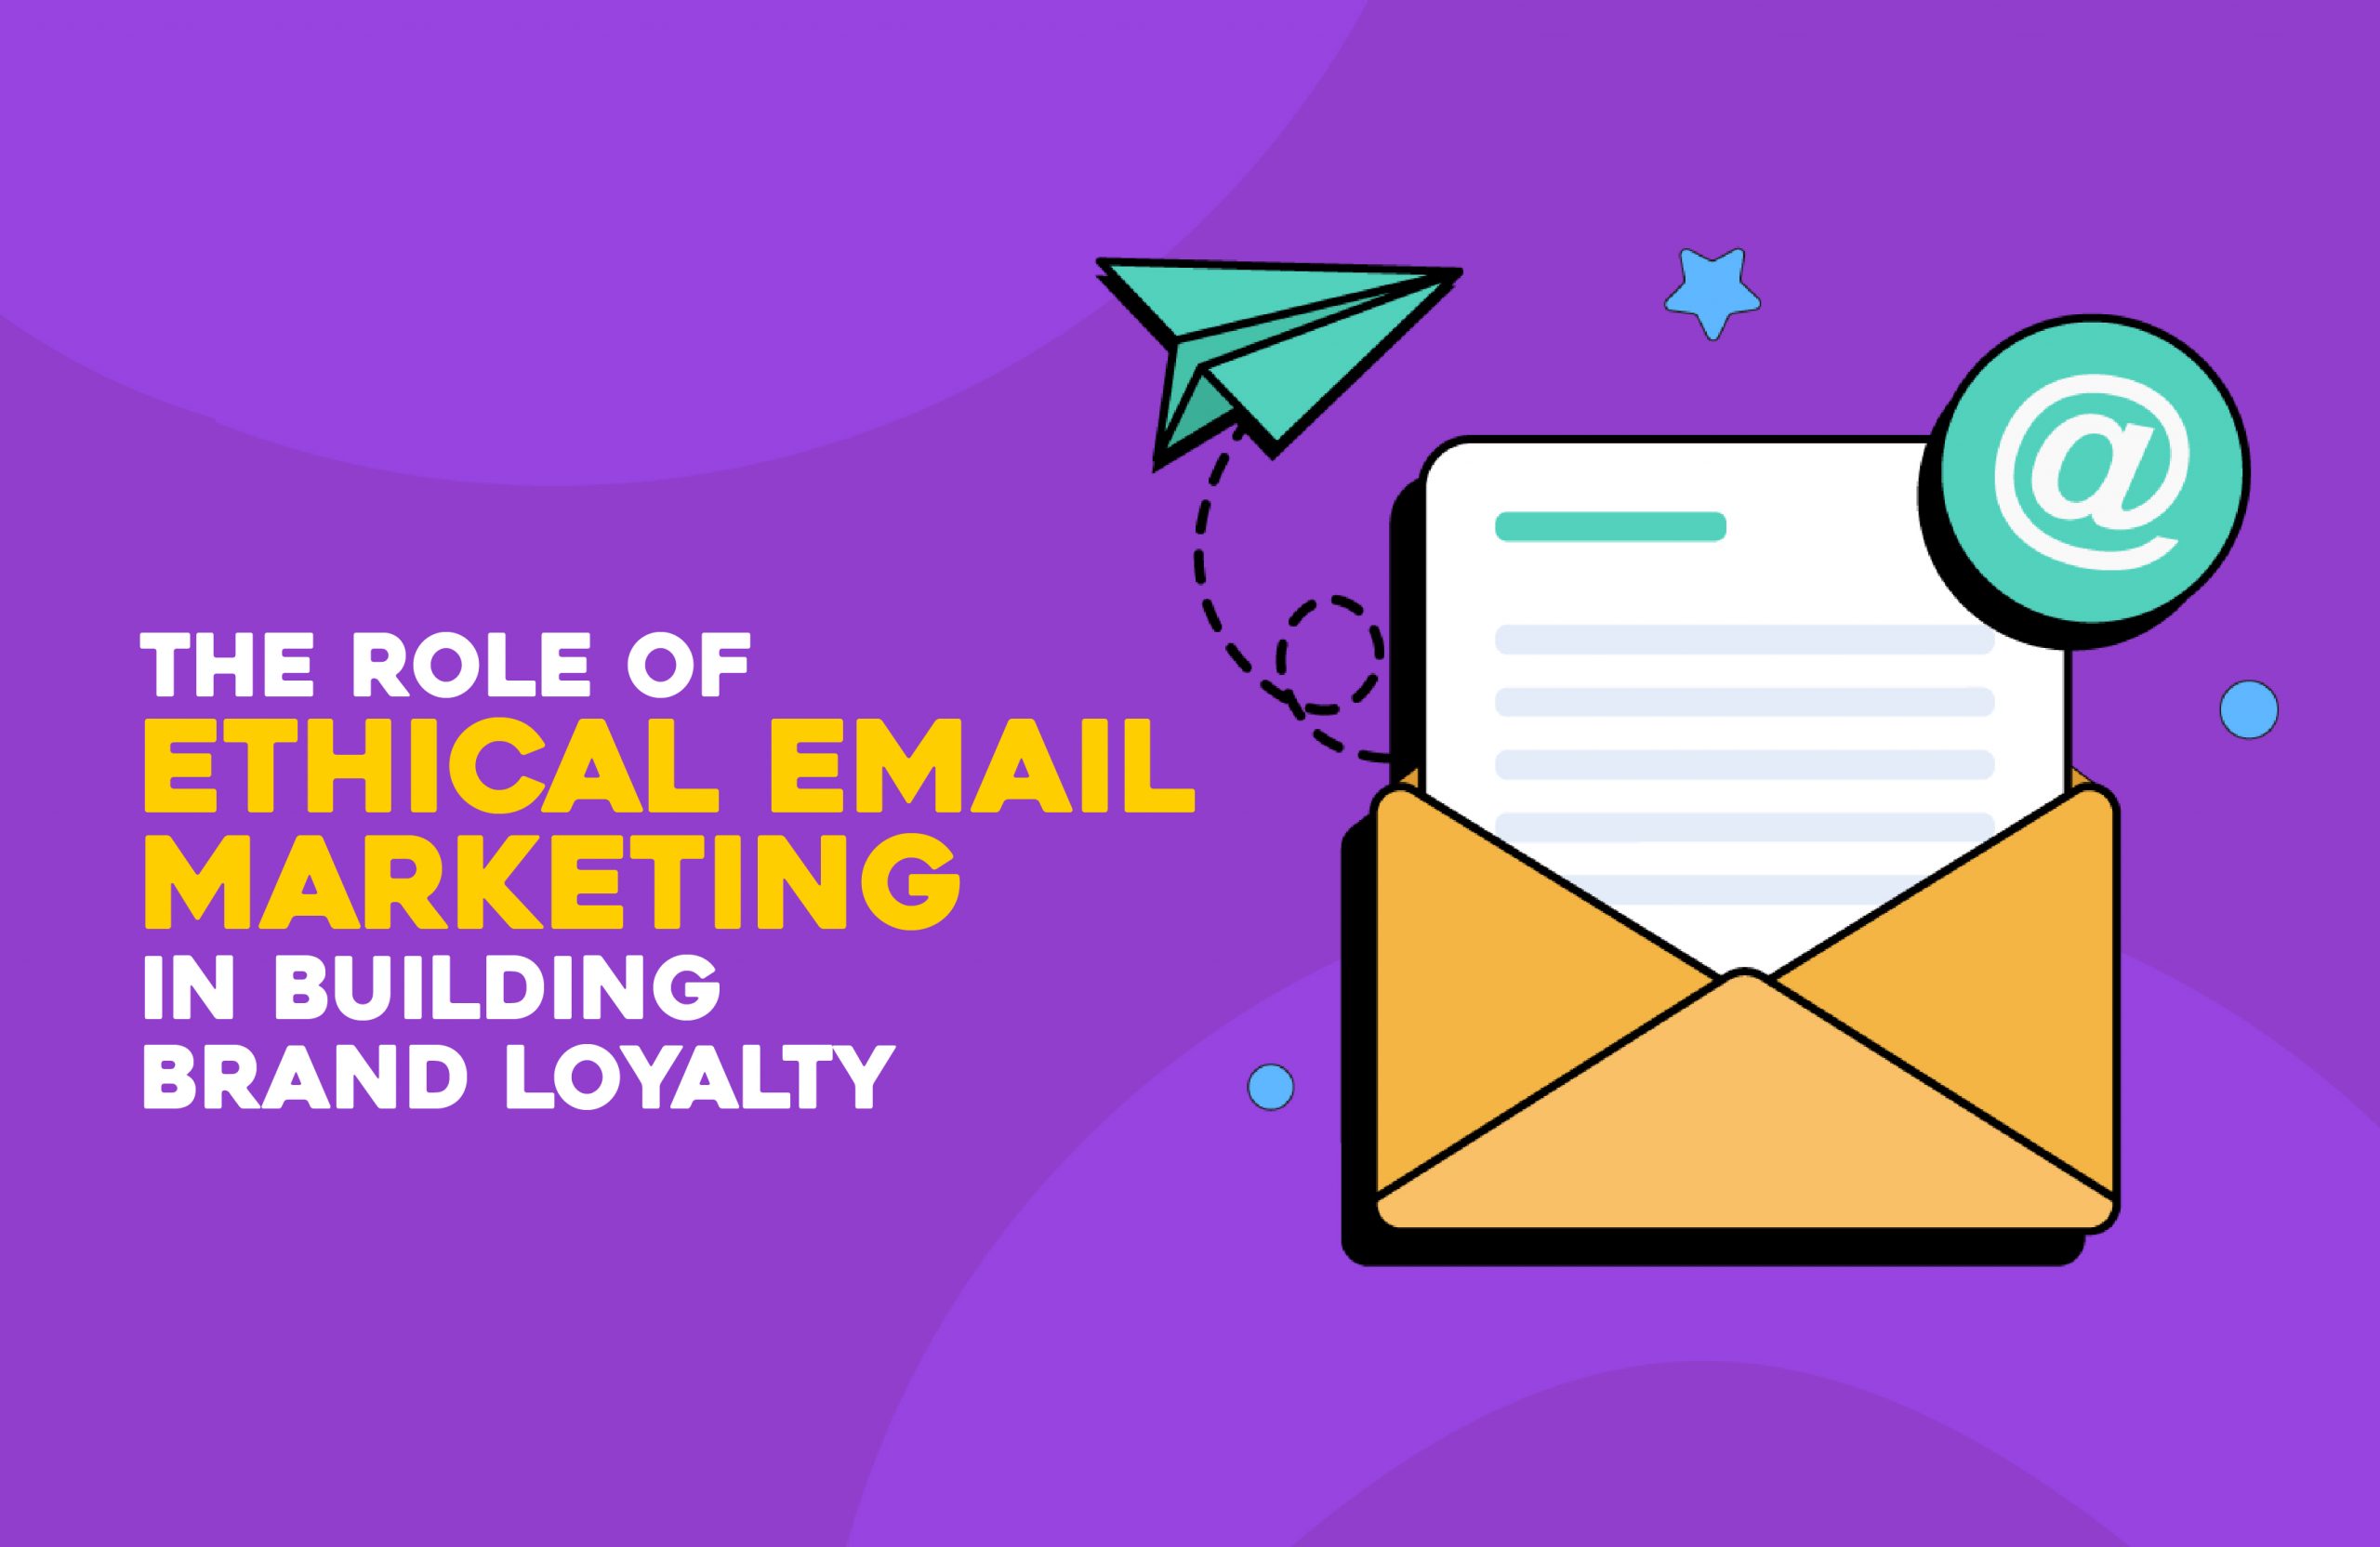 The Role of Ethical Email Marketing in Building Brand Loyalty